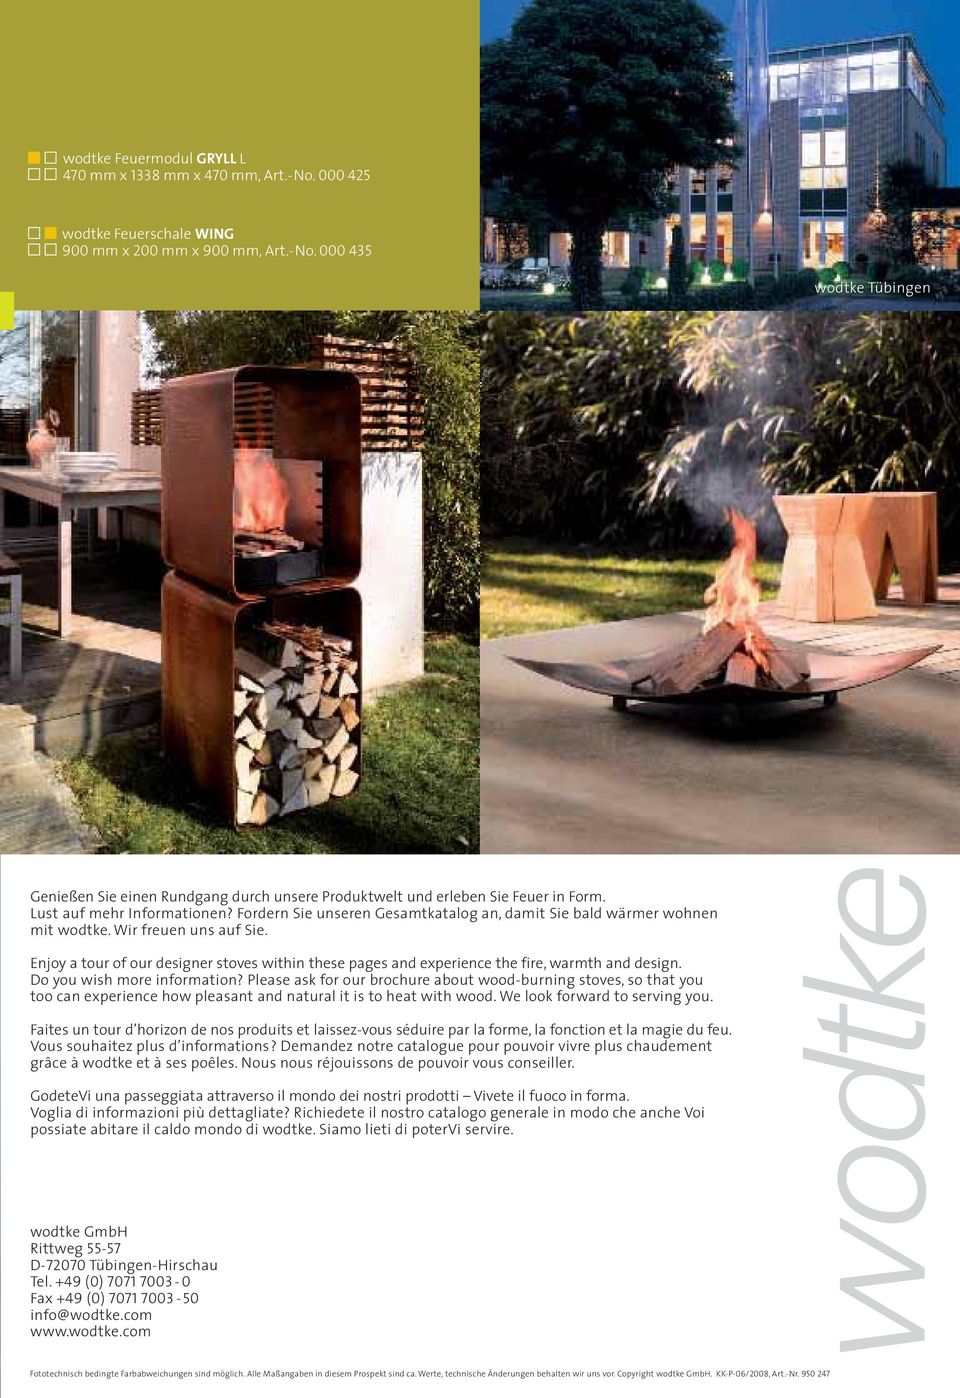 Enjoy a tour of our designer stoves within these pages and experience the fire, warmth and design. Do you wish more information?